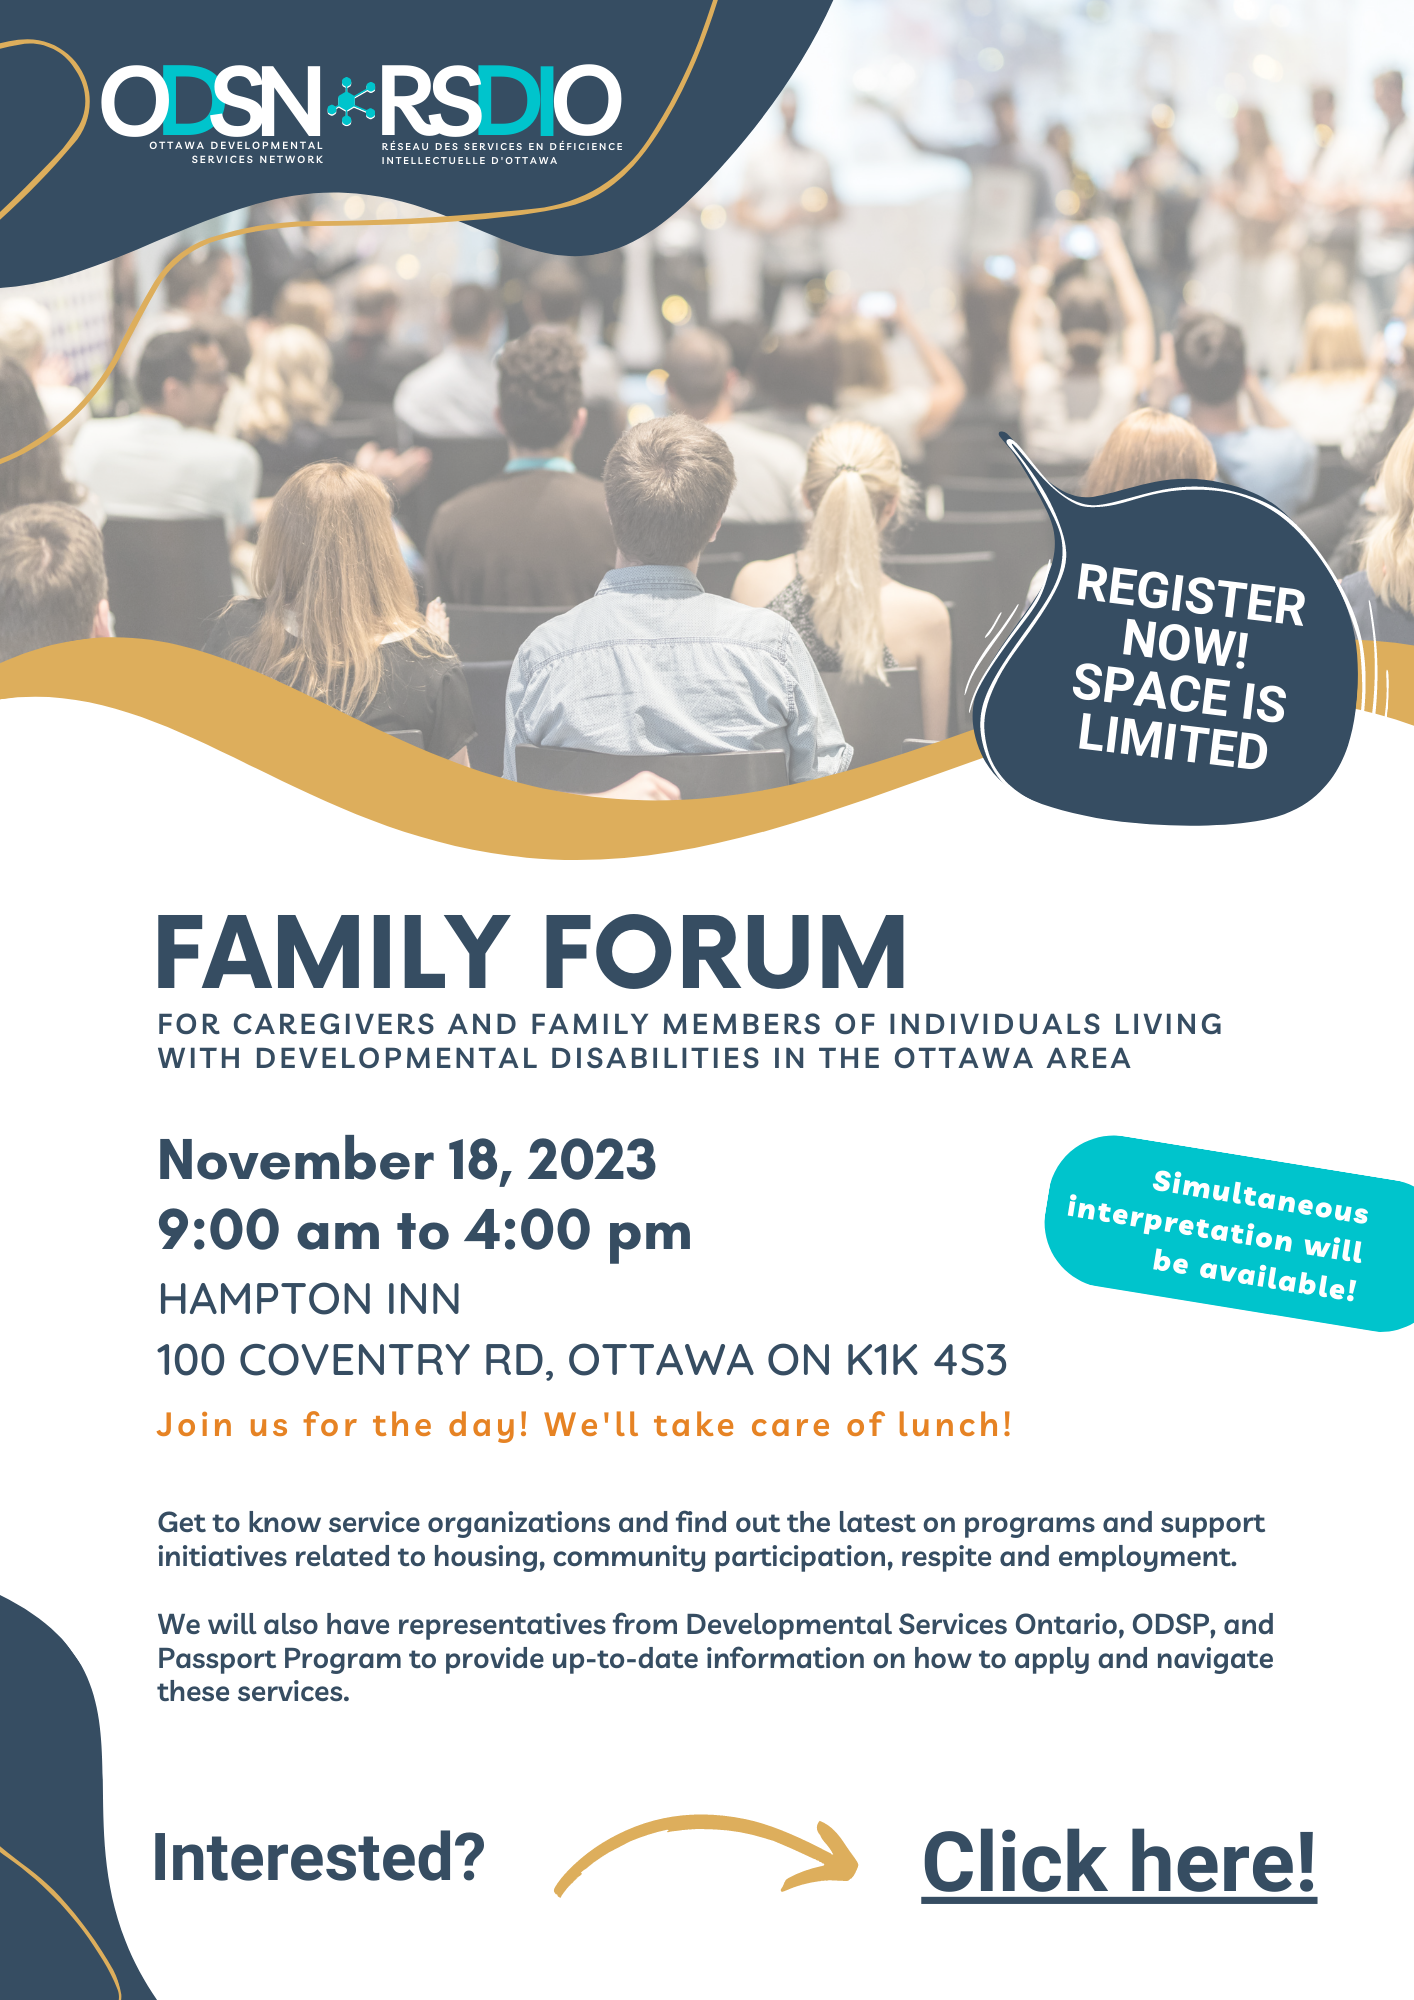 ODSN Family forum for caregivers and family members of individuals living with developmental disabilities in the Ottawa area poster